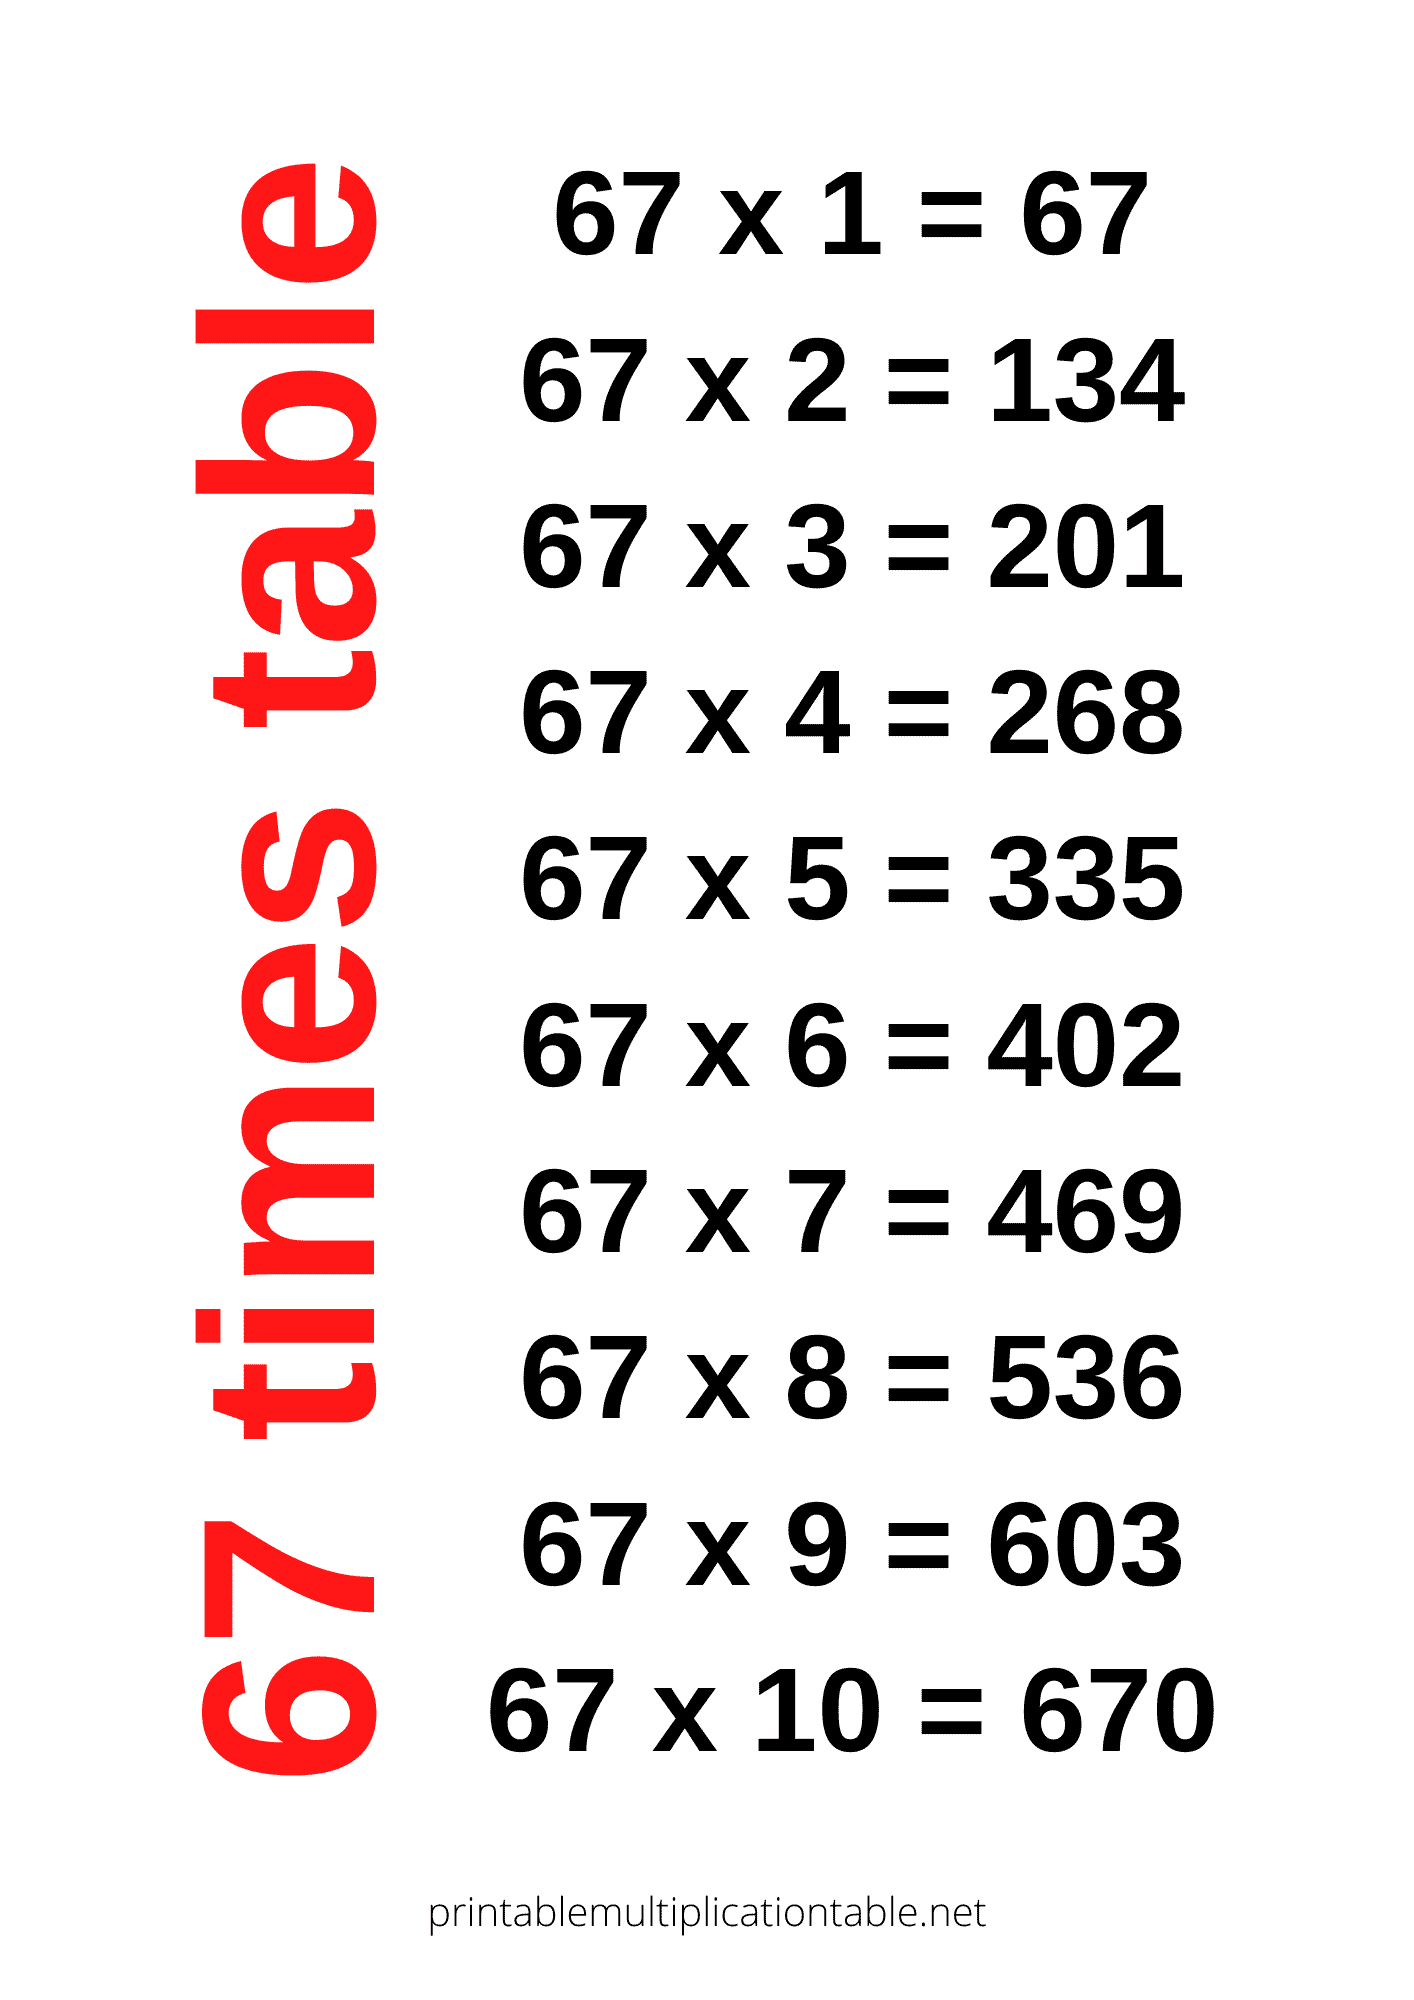 67 times table chart